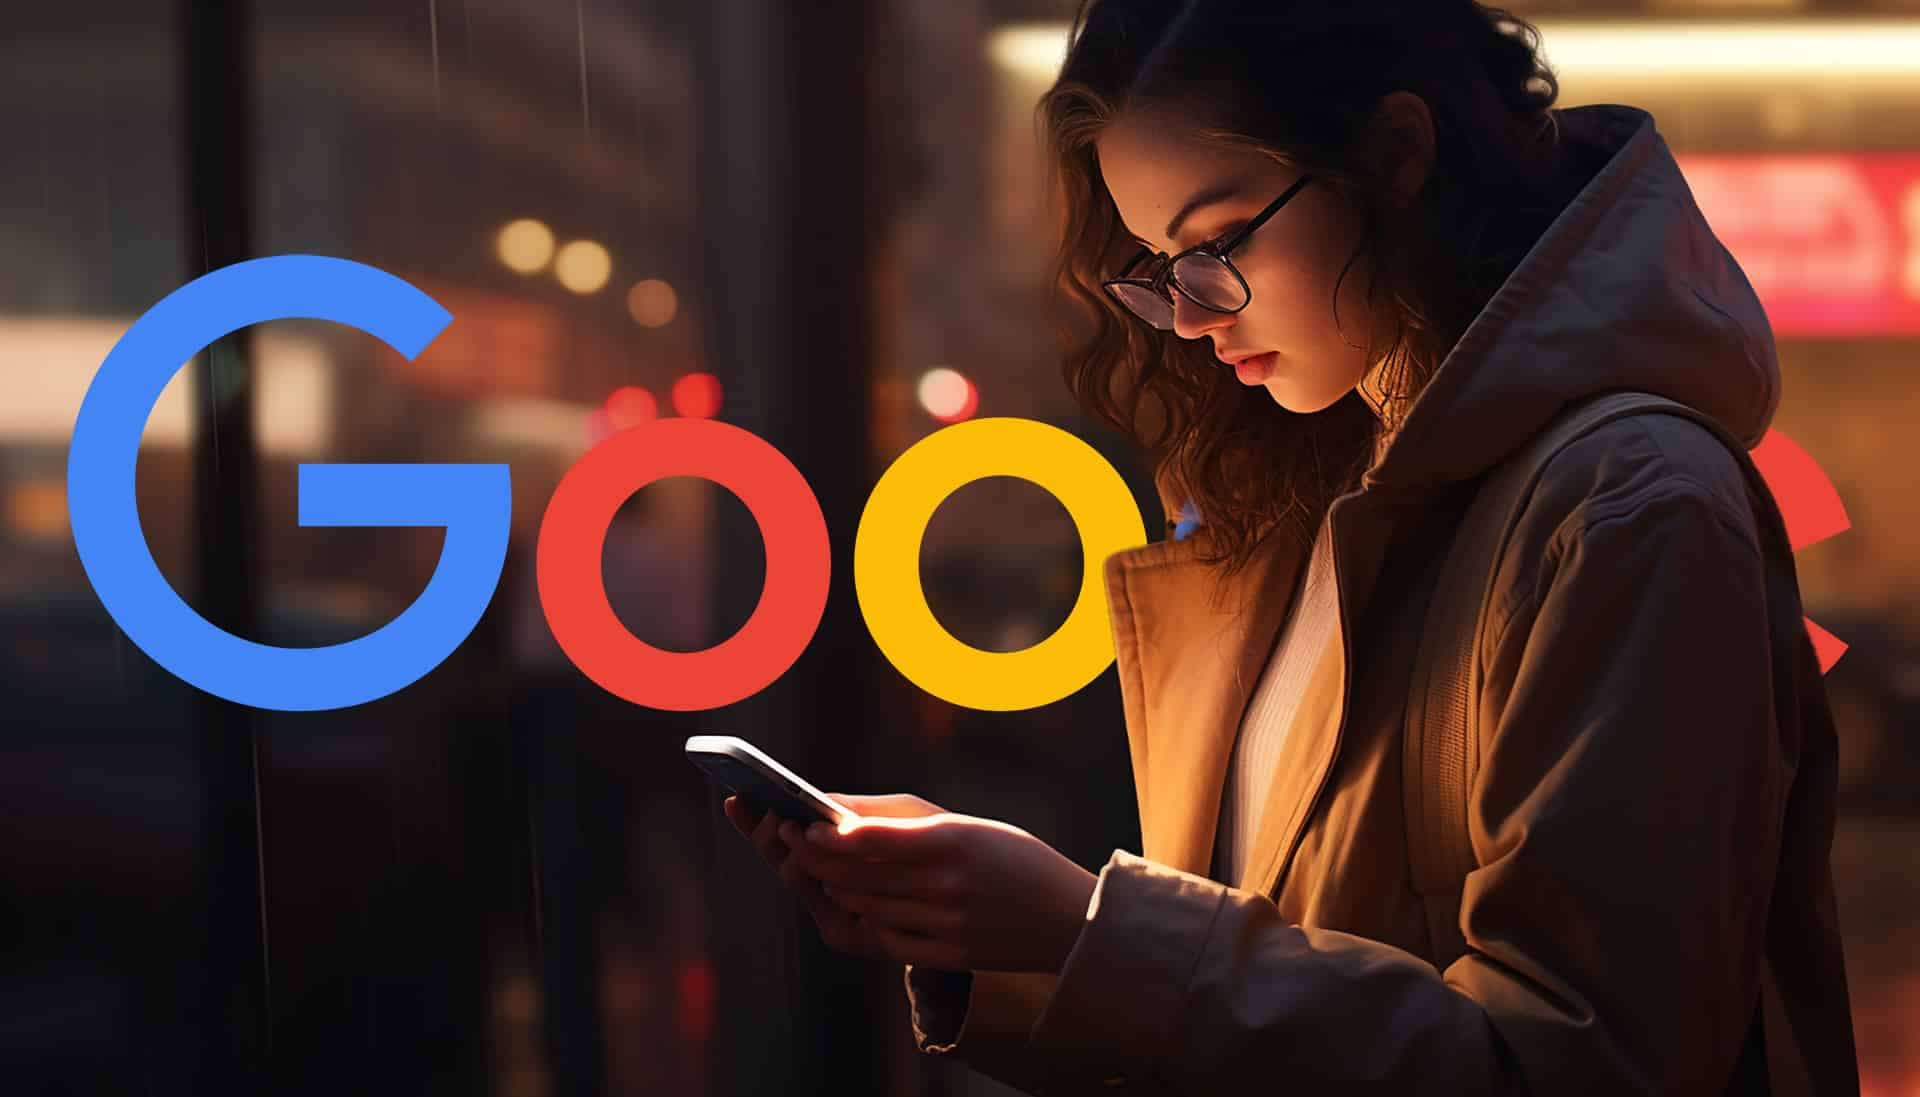 IPG Mediabrands urges clients to pause Google PMax campaigns